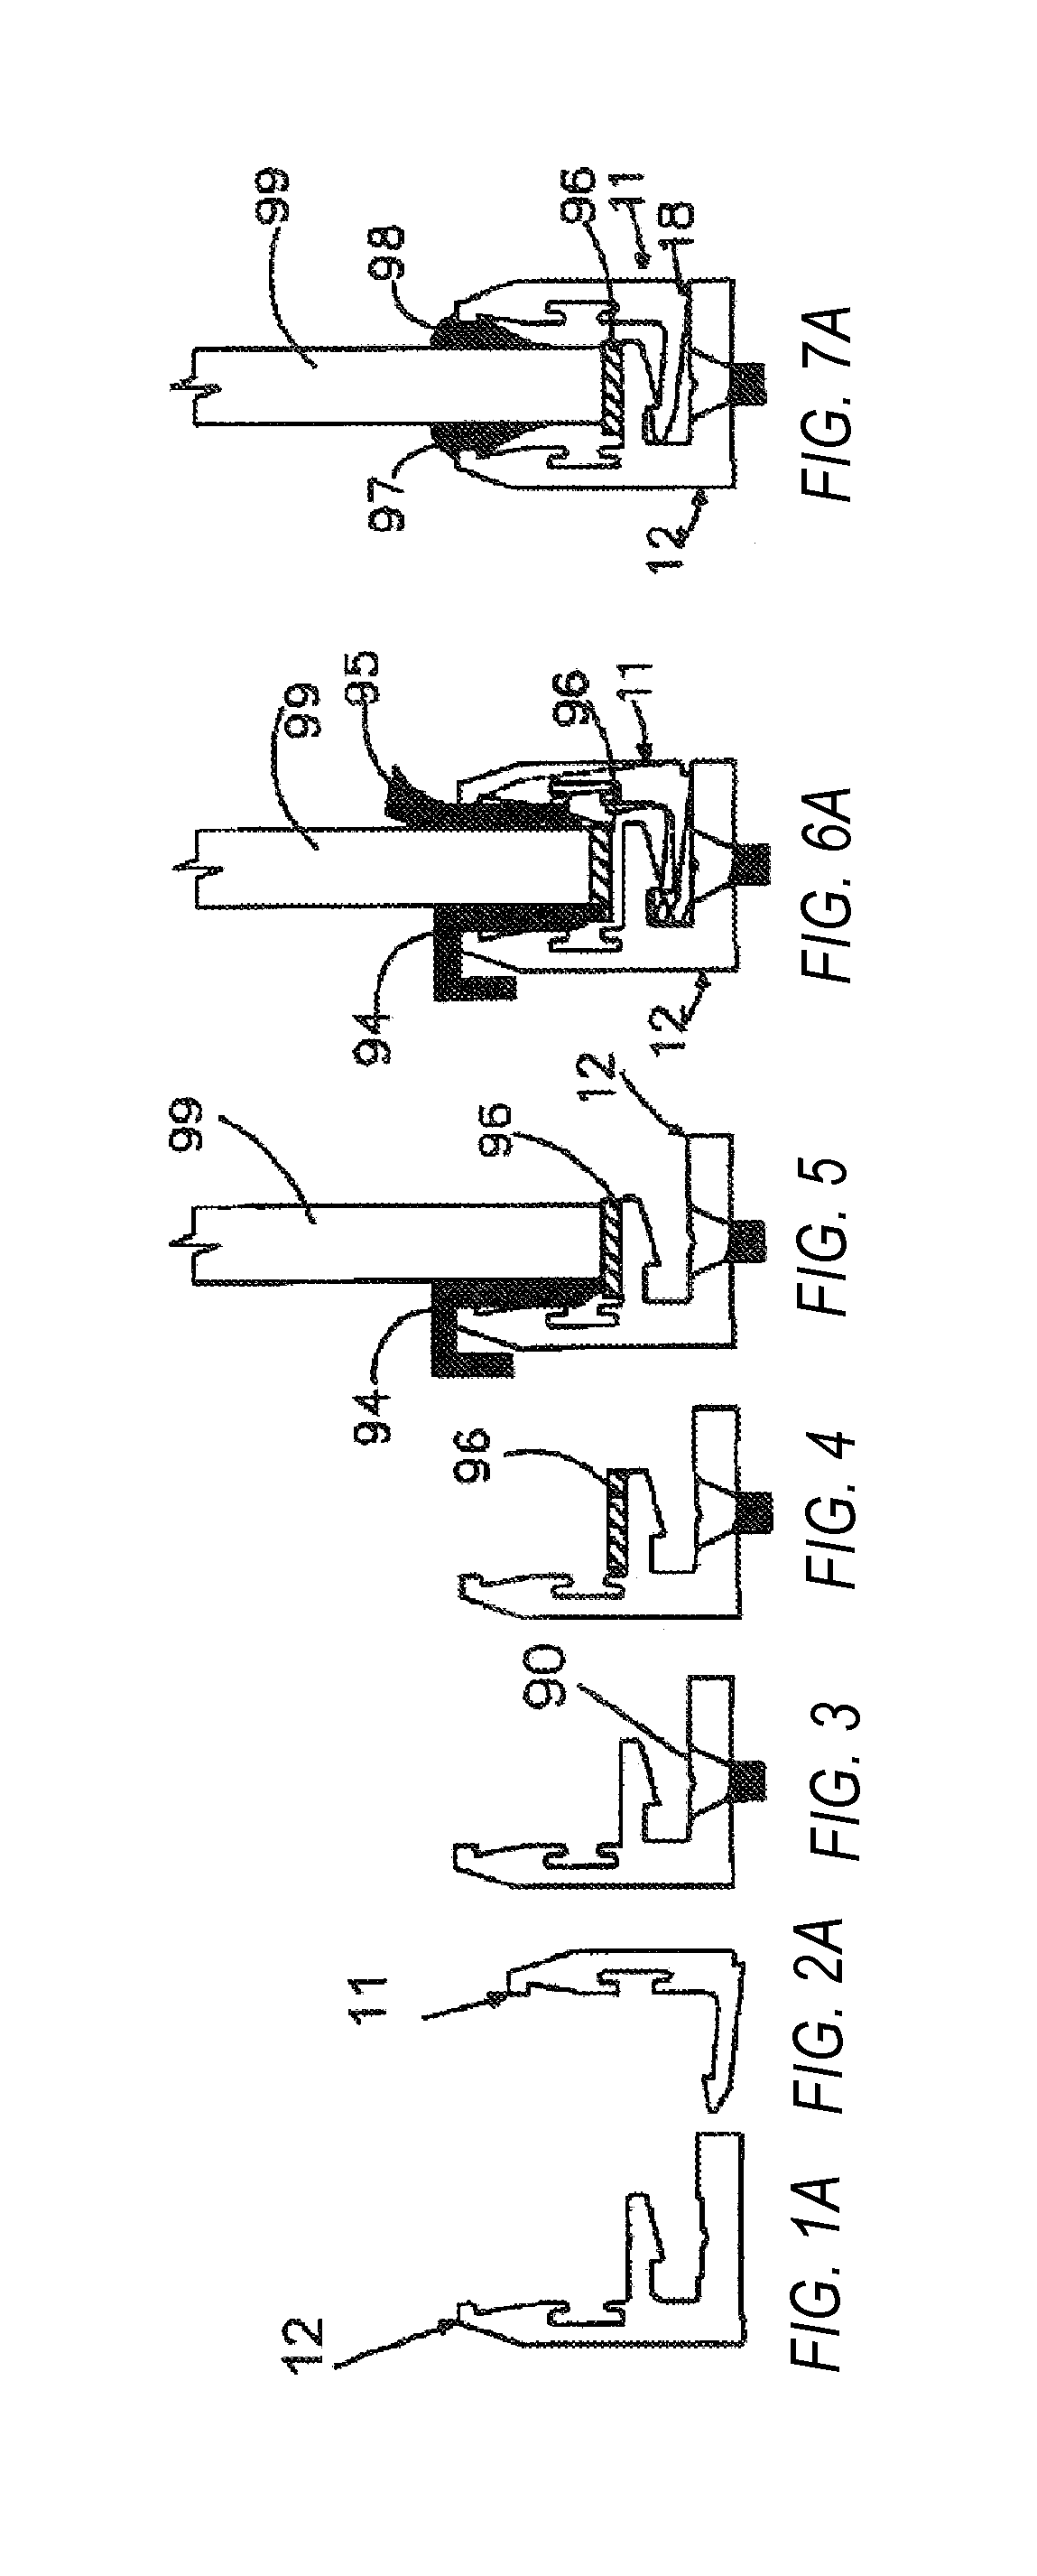 Glazing system with thermal break